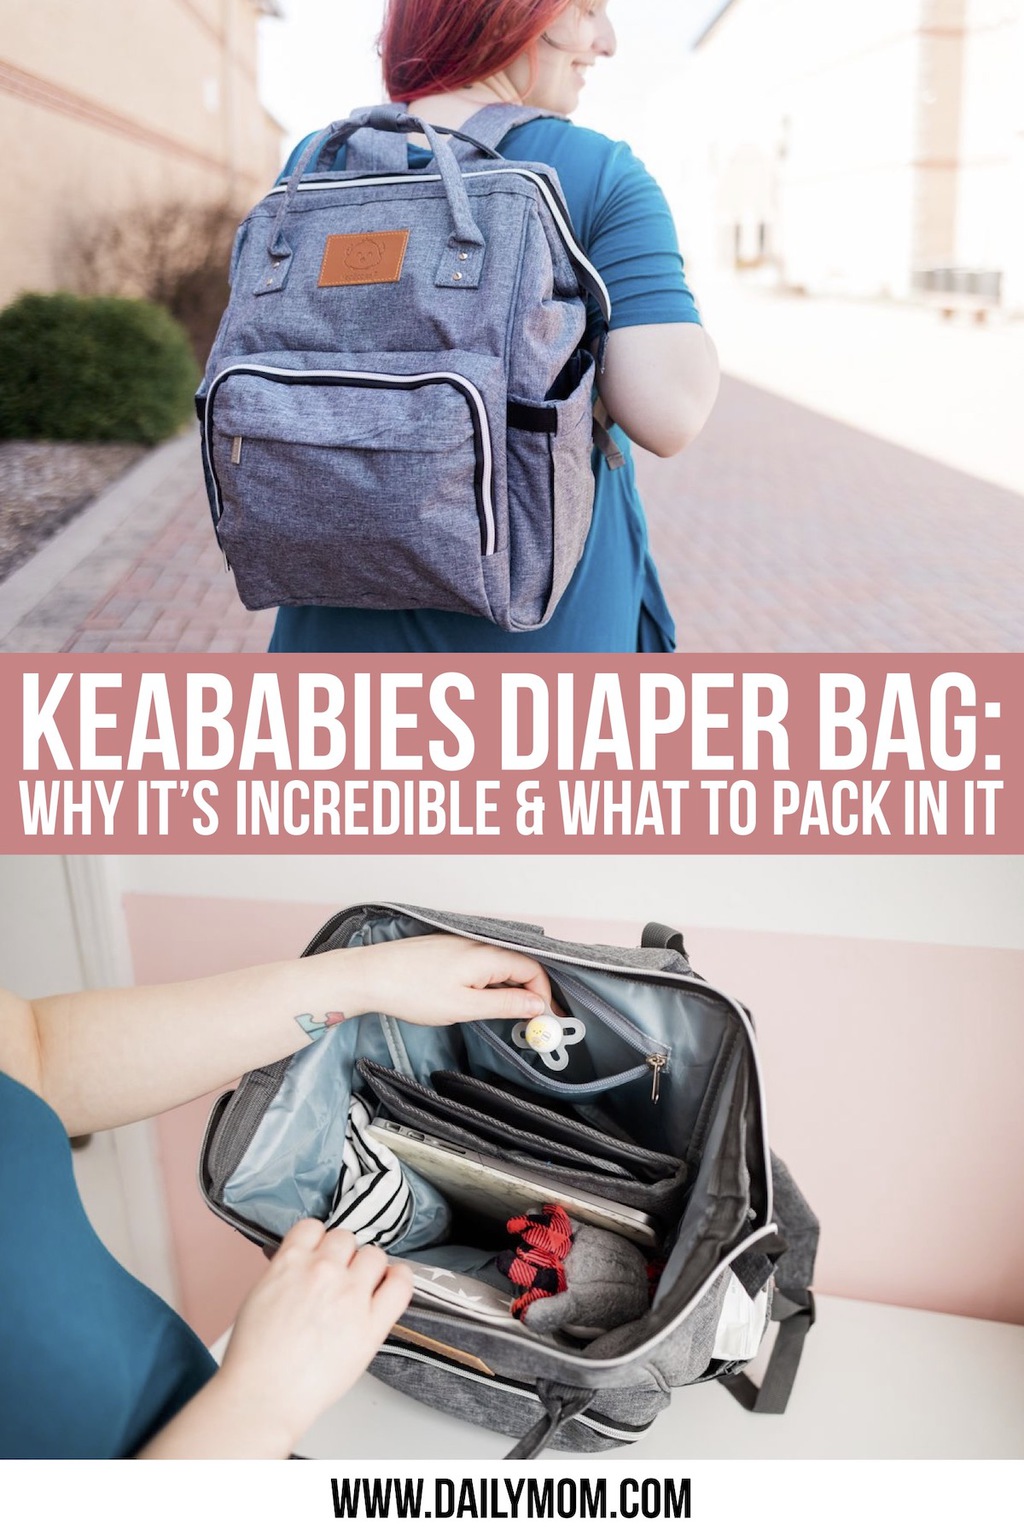 Keababies: The Best Diaper Bag With 3 Essential Items You’ll Need